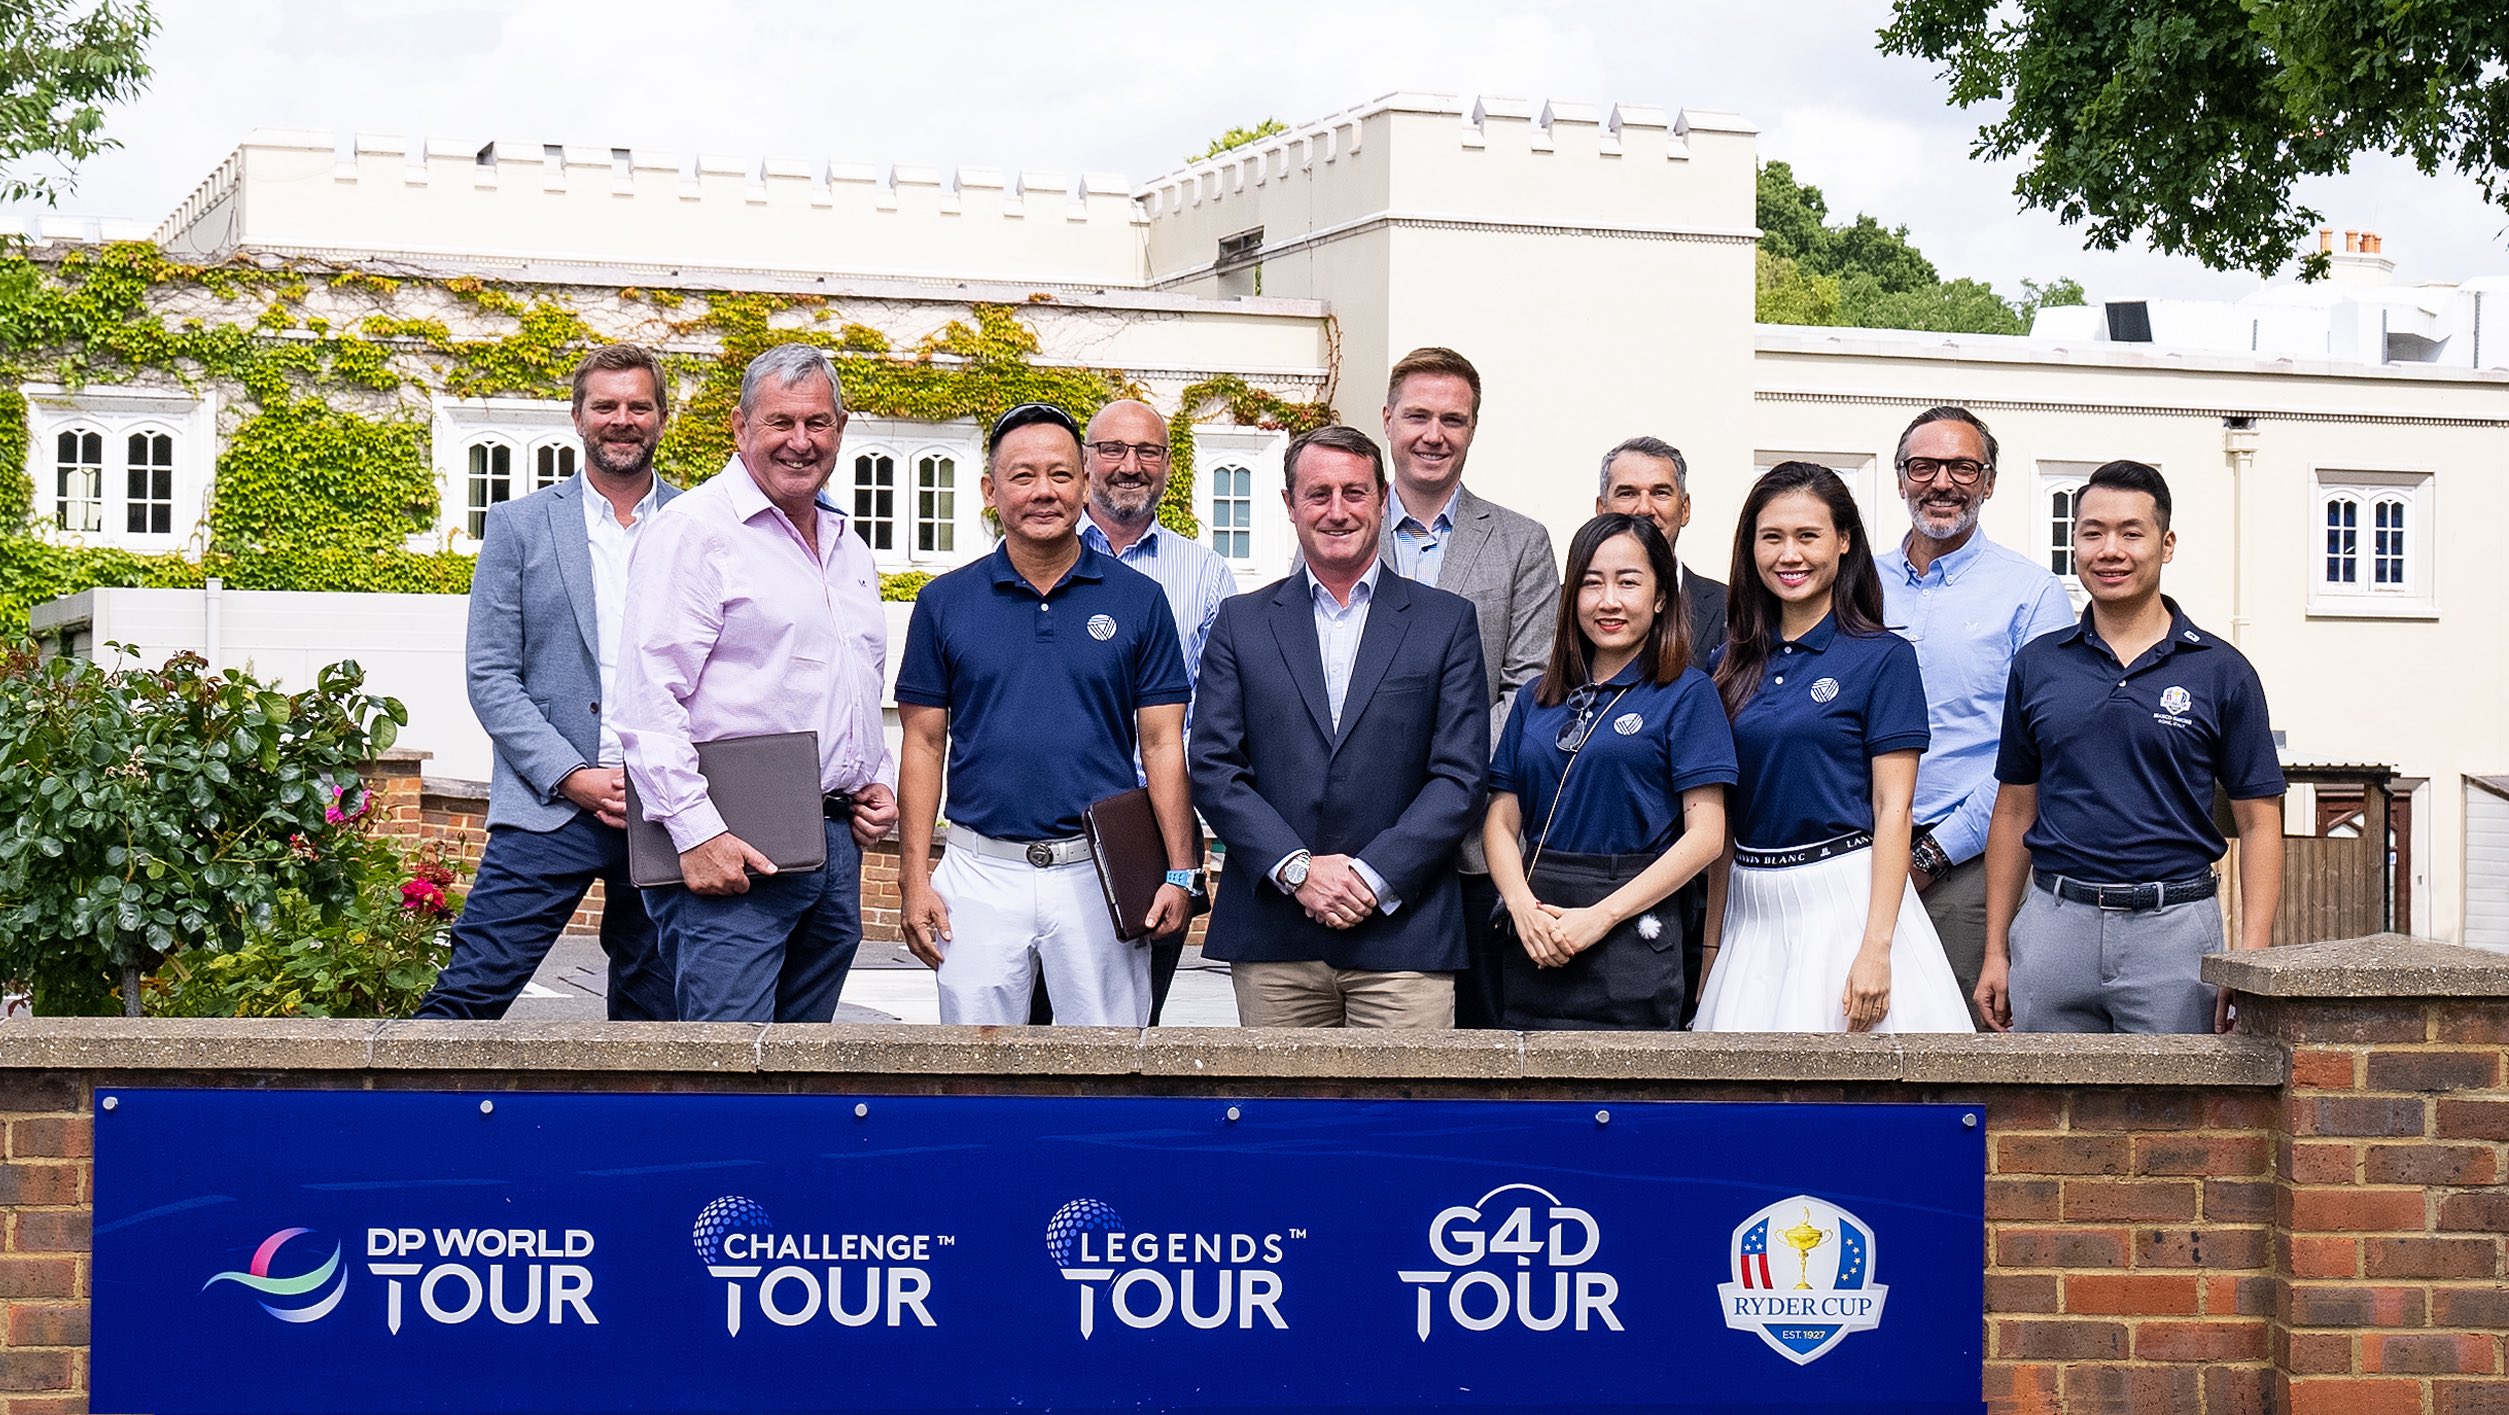 Caption – Board of Directors of VGS Group and Legend Tour Leadership Team